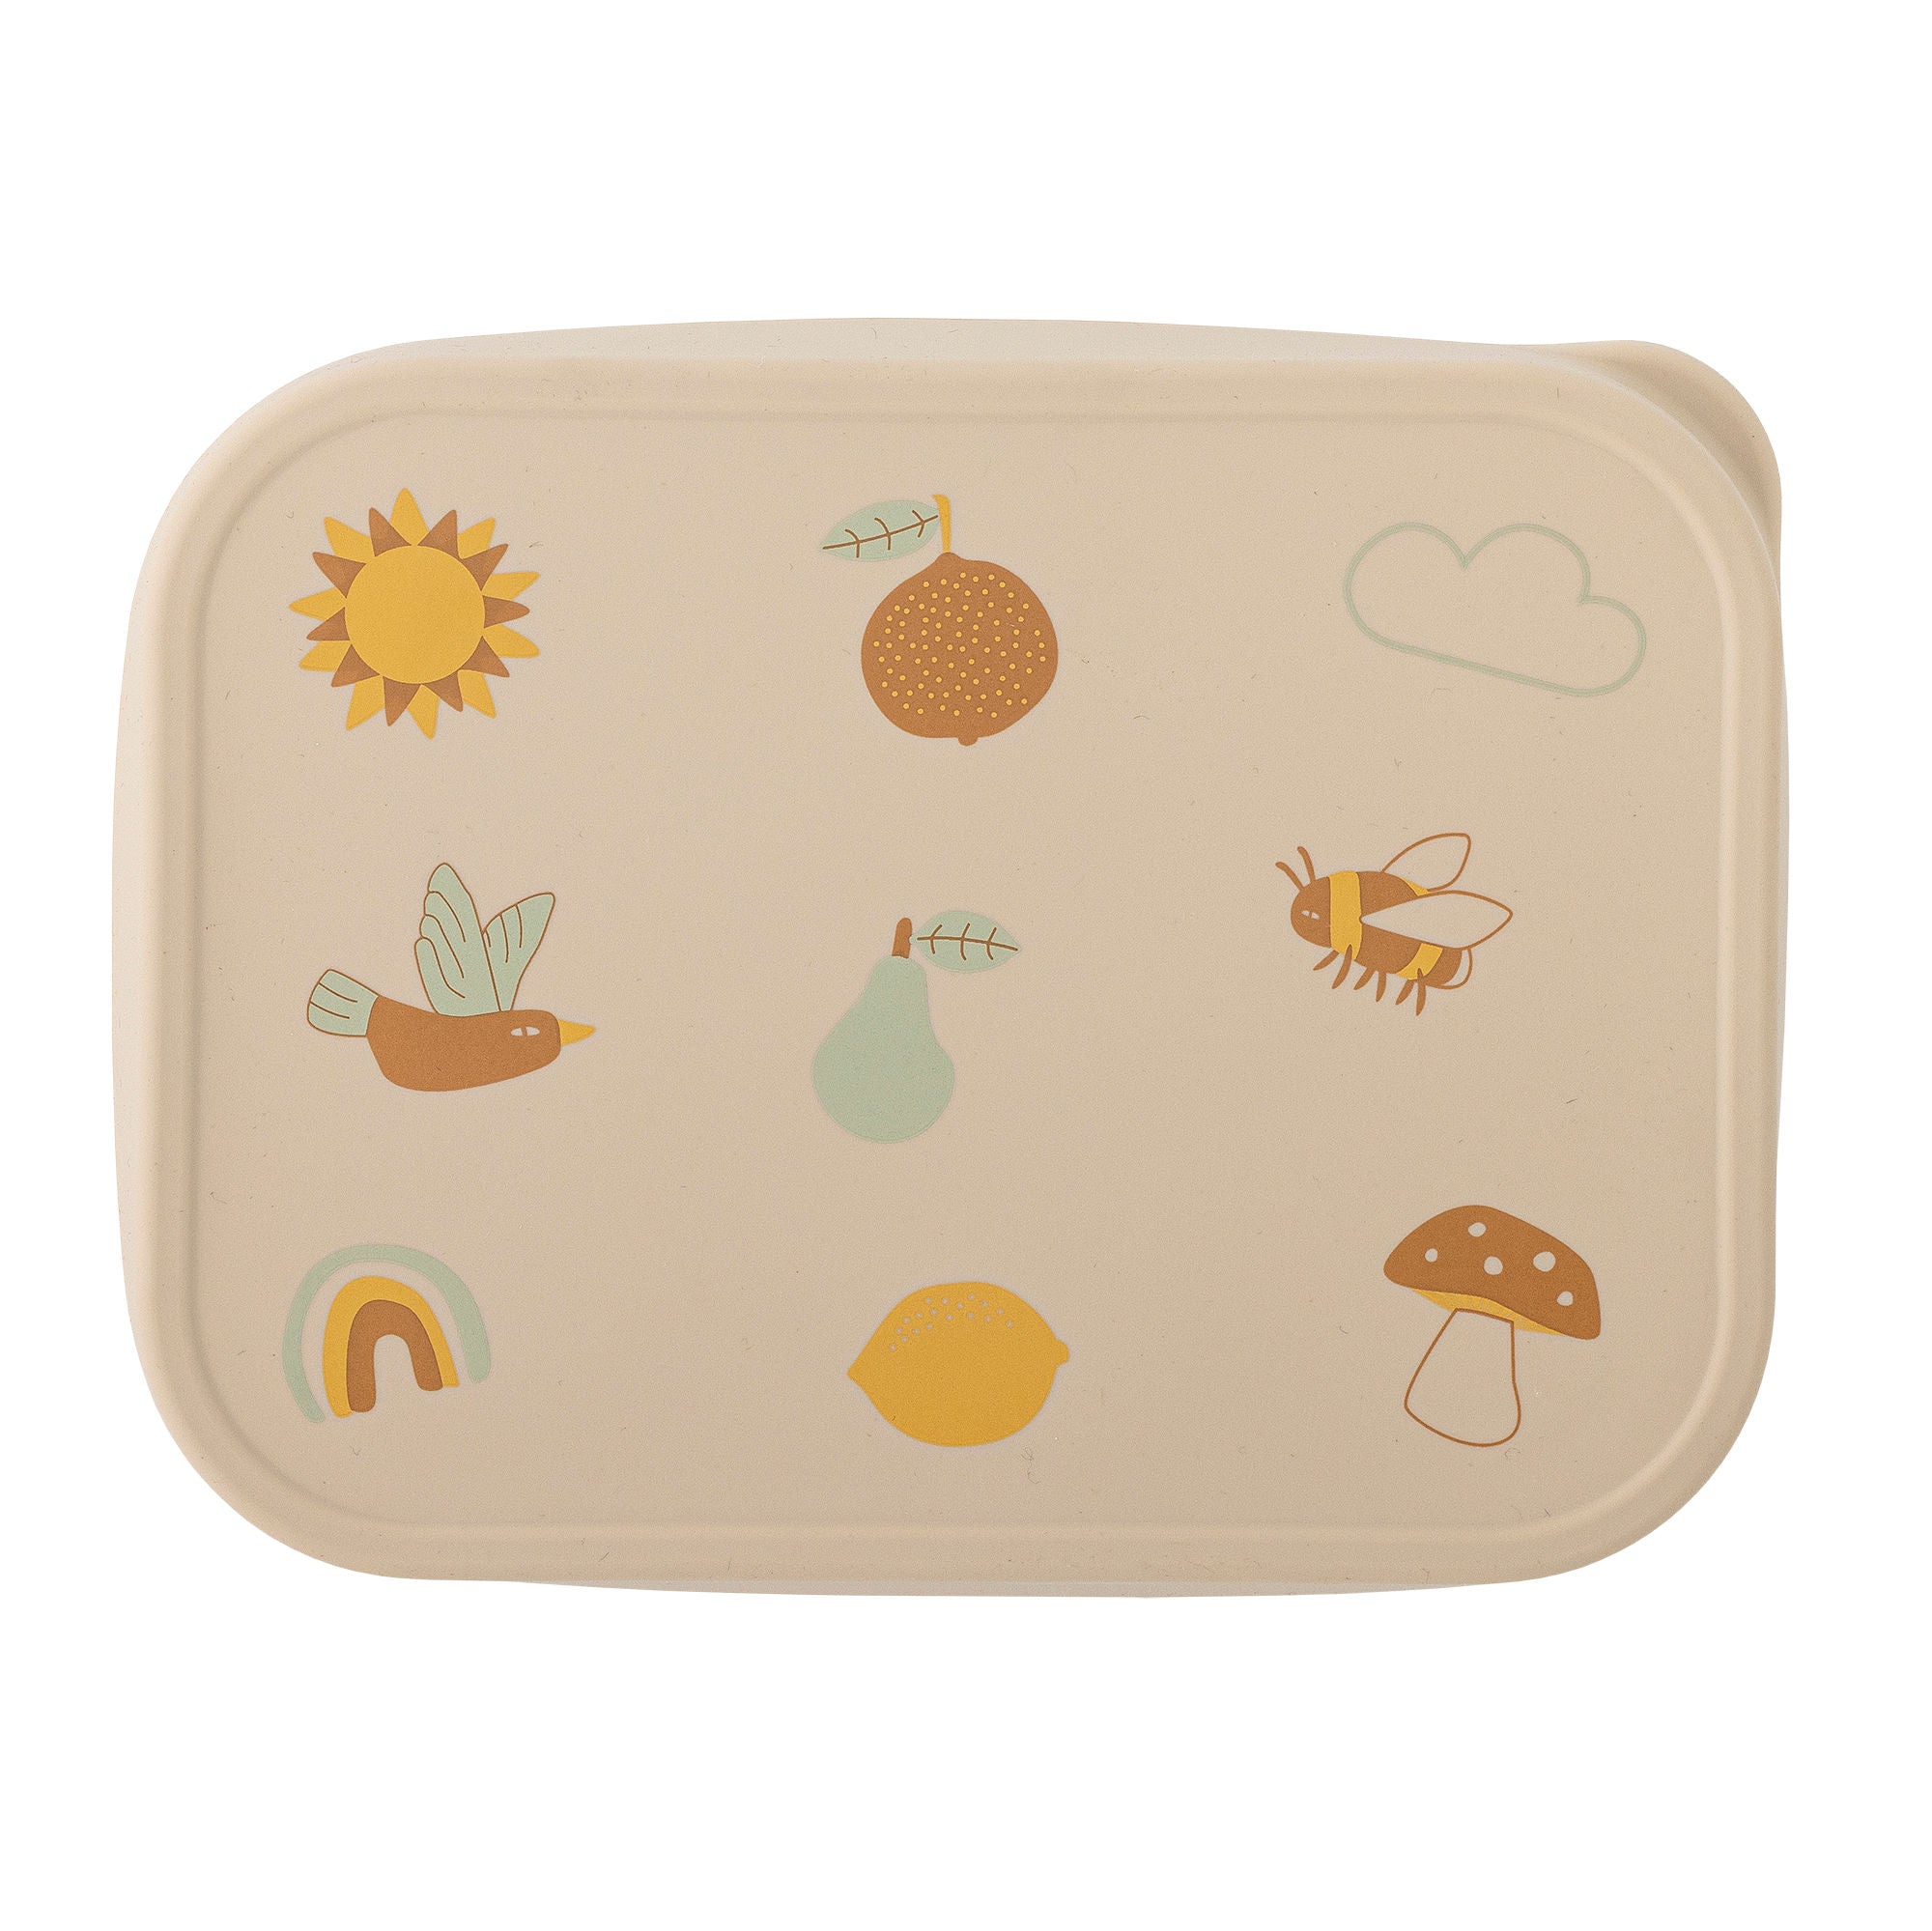 Bloomingville MINI Agnes Lunch Box, Nature, Stainless Steel